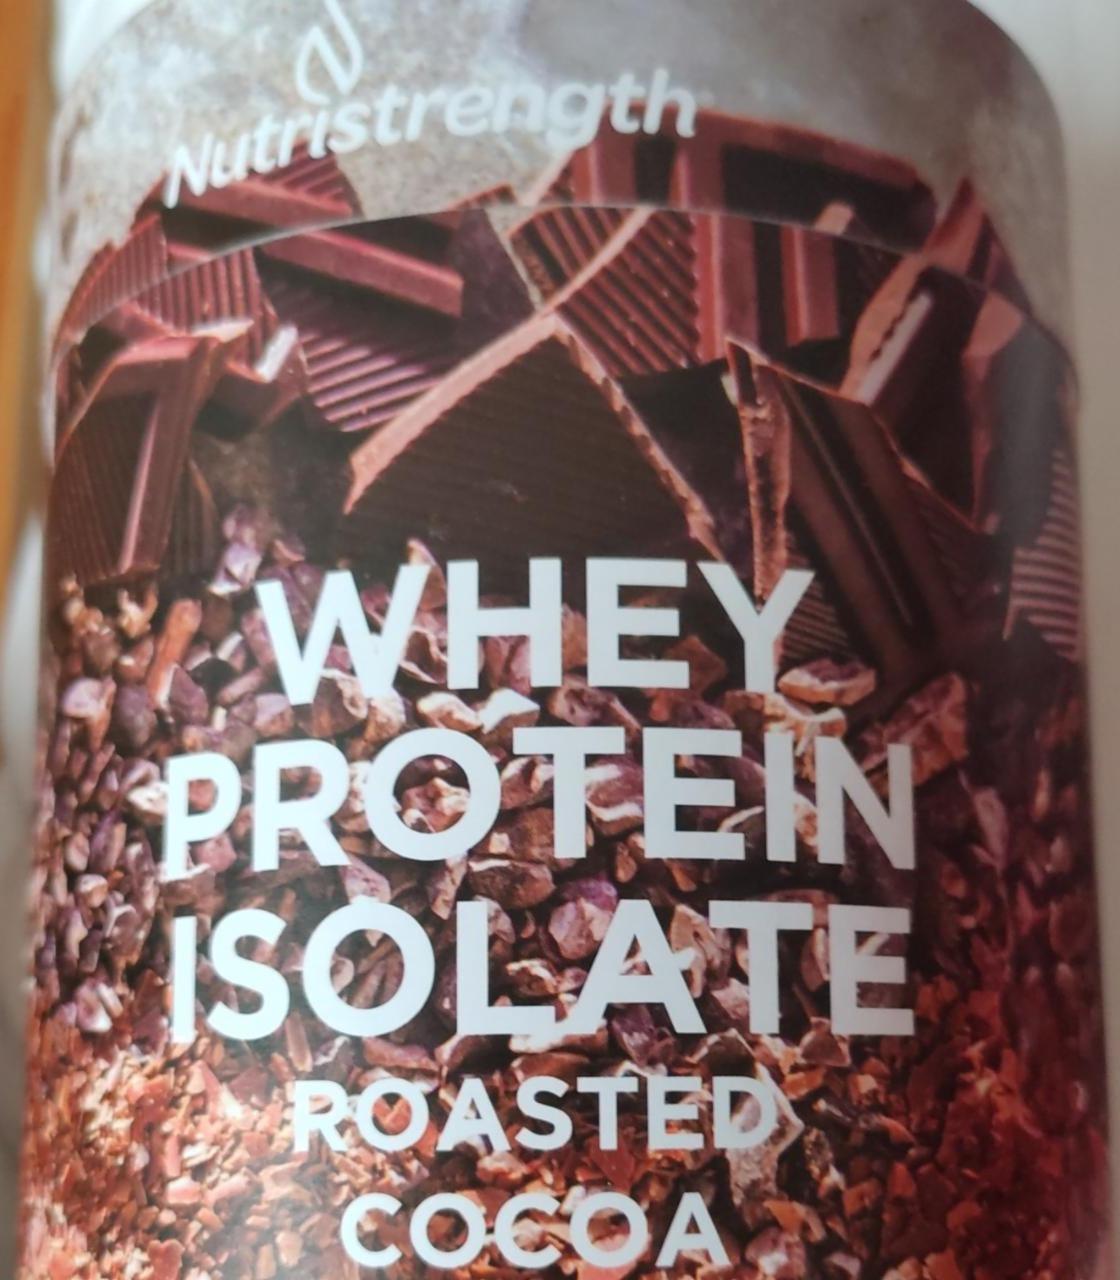 Fotografie - Whey Protein Isolate Roasted Cocoa Nutristrength